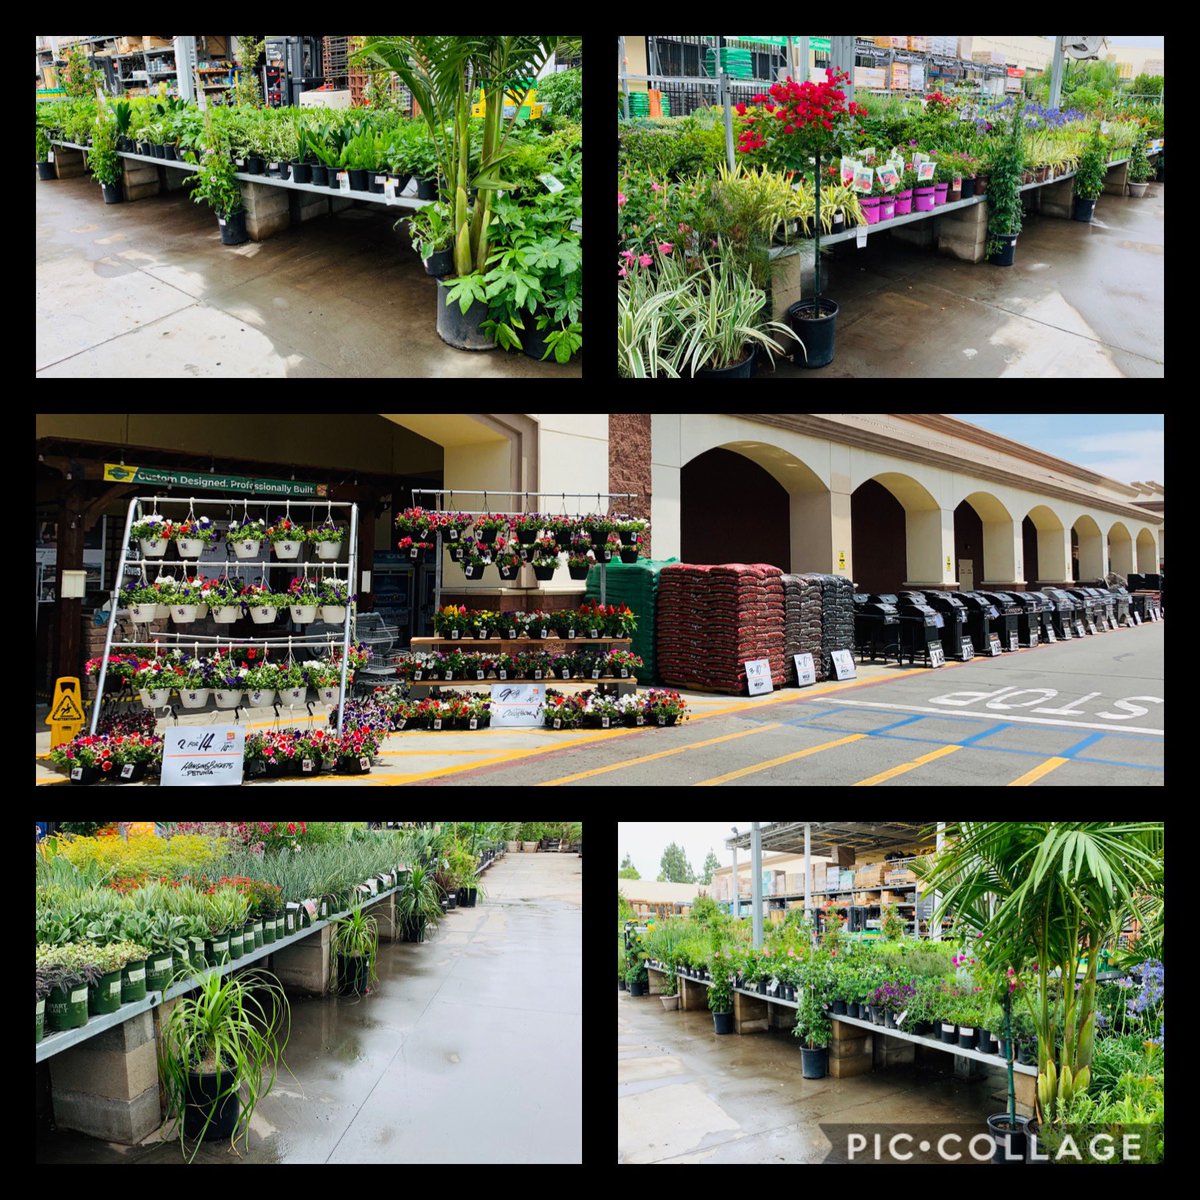 Ready for a fantastic weekend at the Eastvale Gateway! Special thank you to all of our vendors for all they do to keep us fresh and ready! @JamesIrvingTHD @LisaFerence @CuellarLauryn @1084Depot